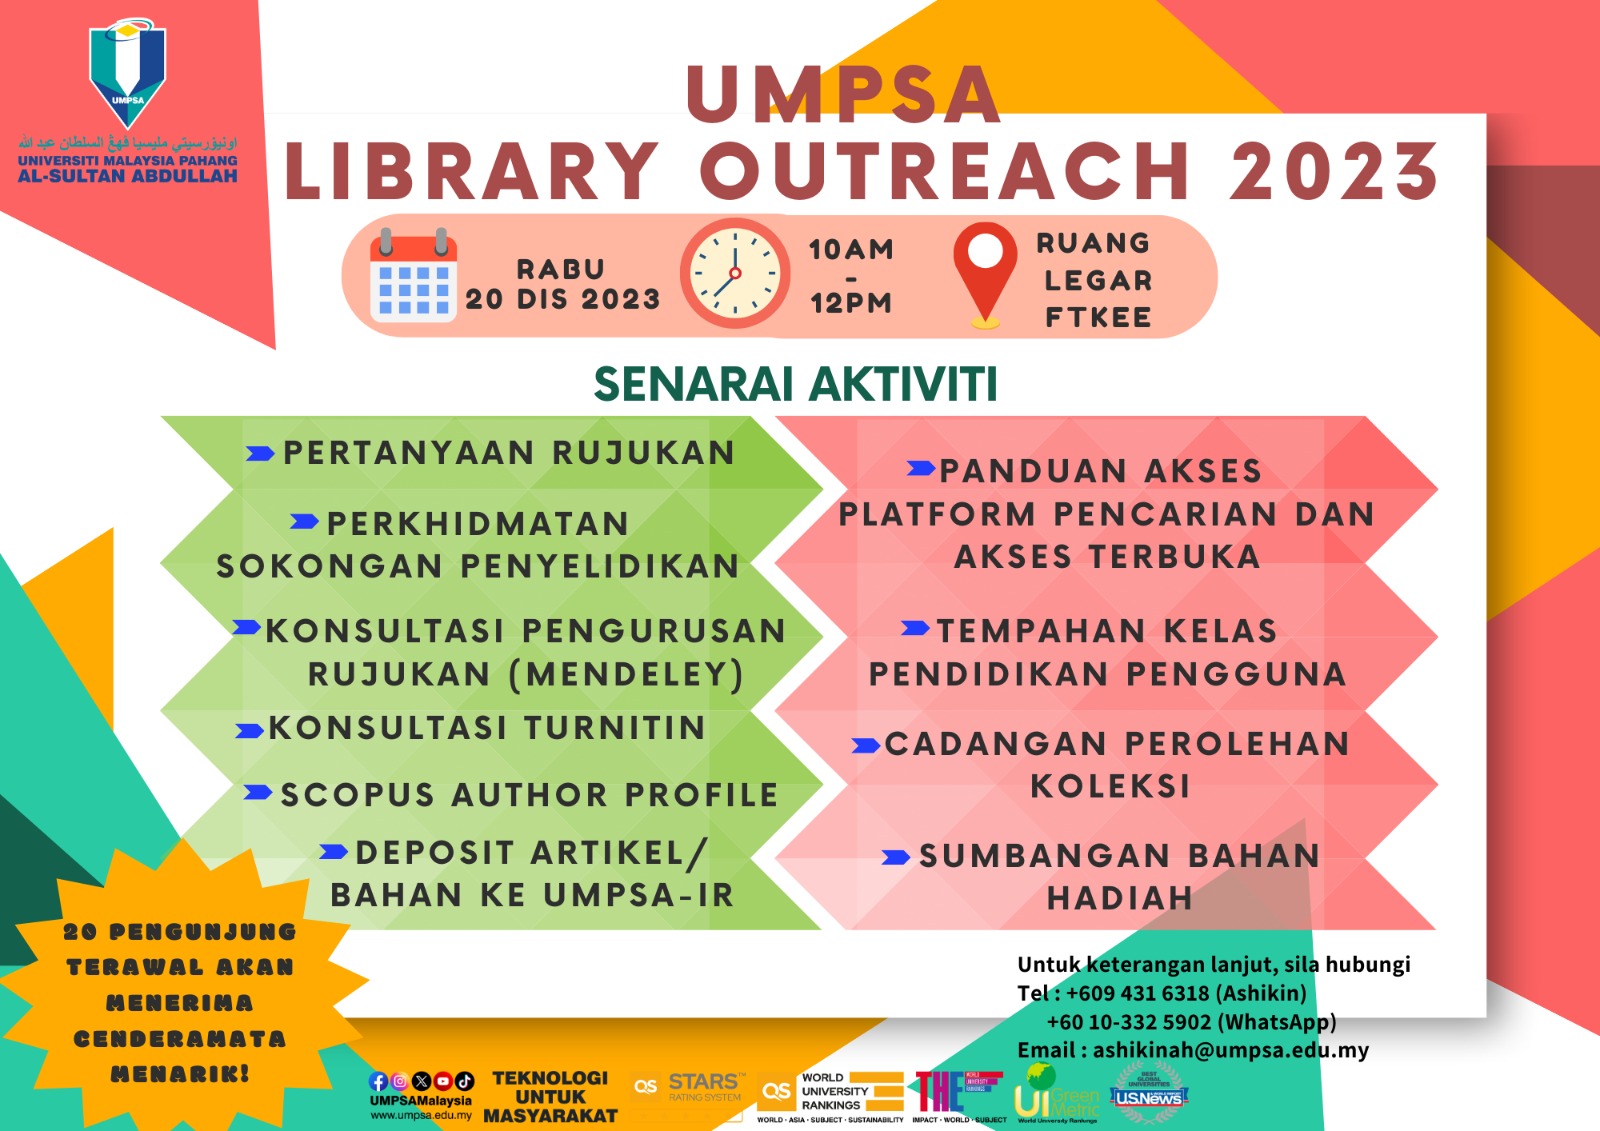 UMPSA Library Outreach 2023 at FTKEE